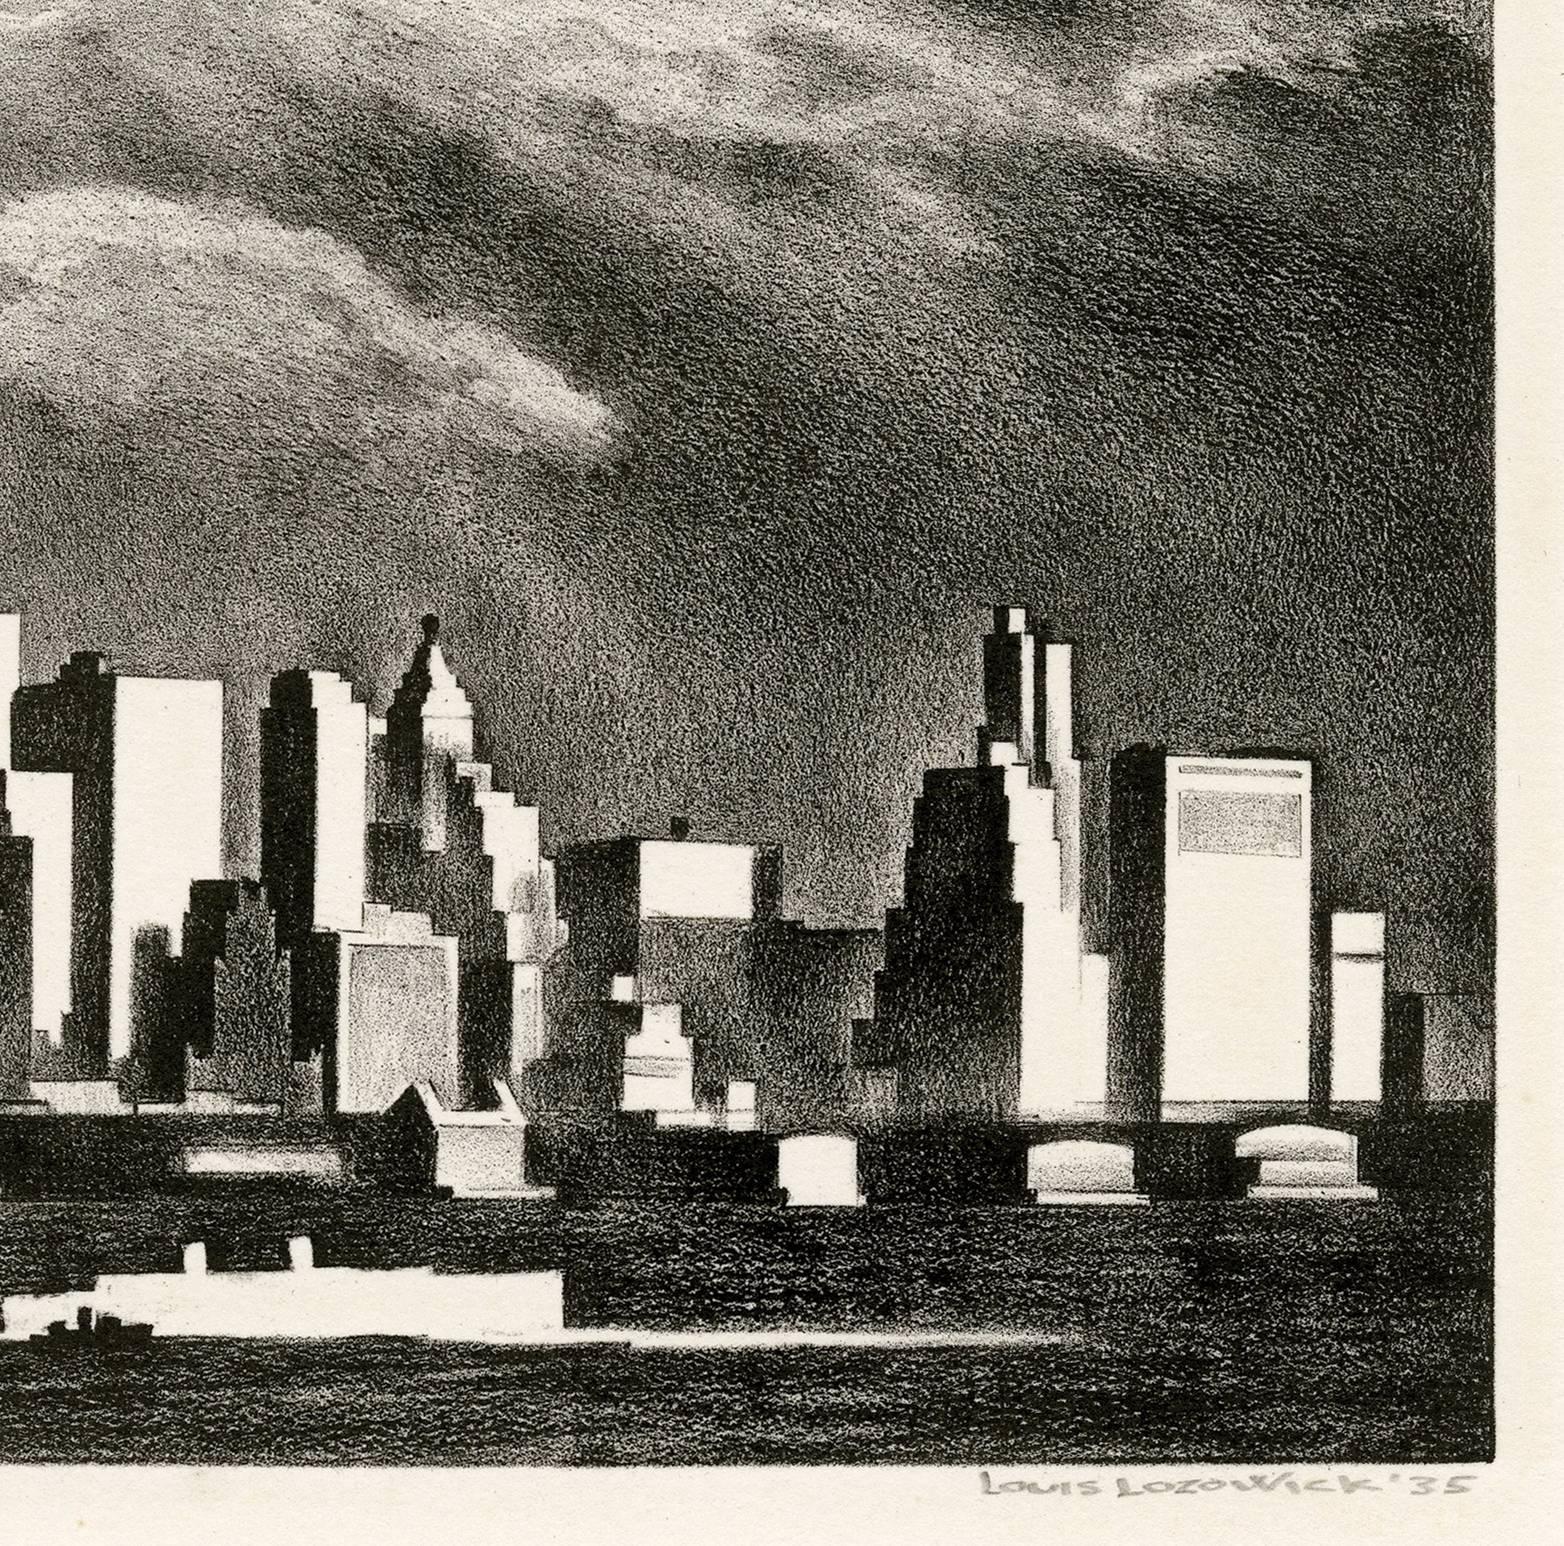  Storm Clouds Over Manhattan  - Print by Louis Lozowick